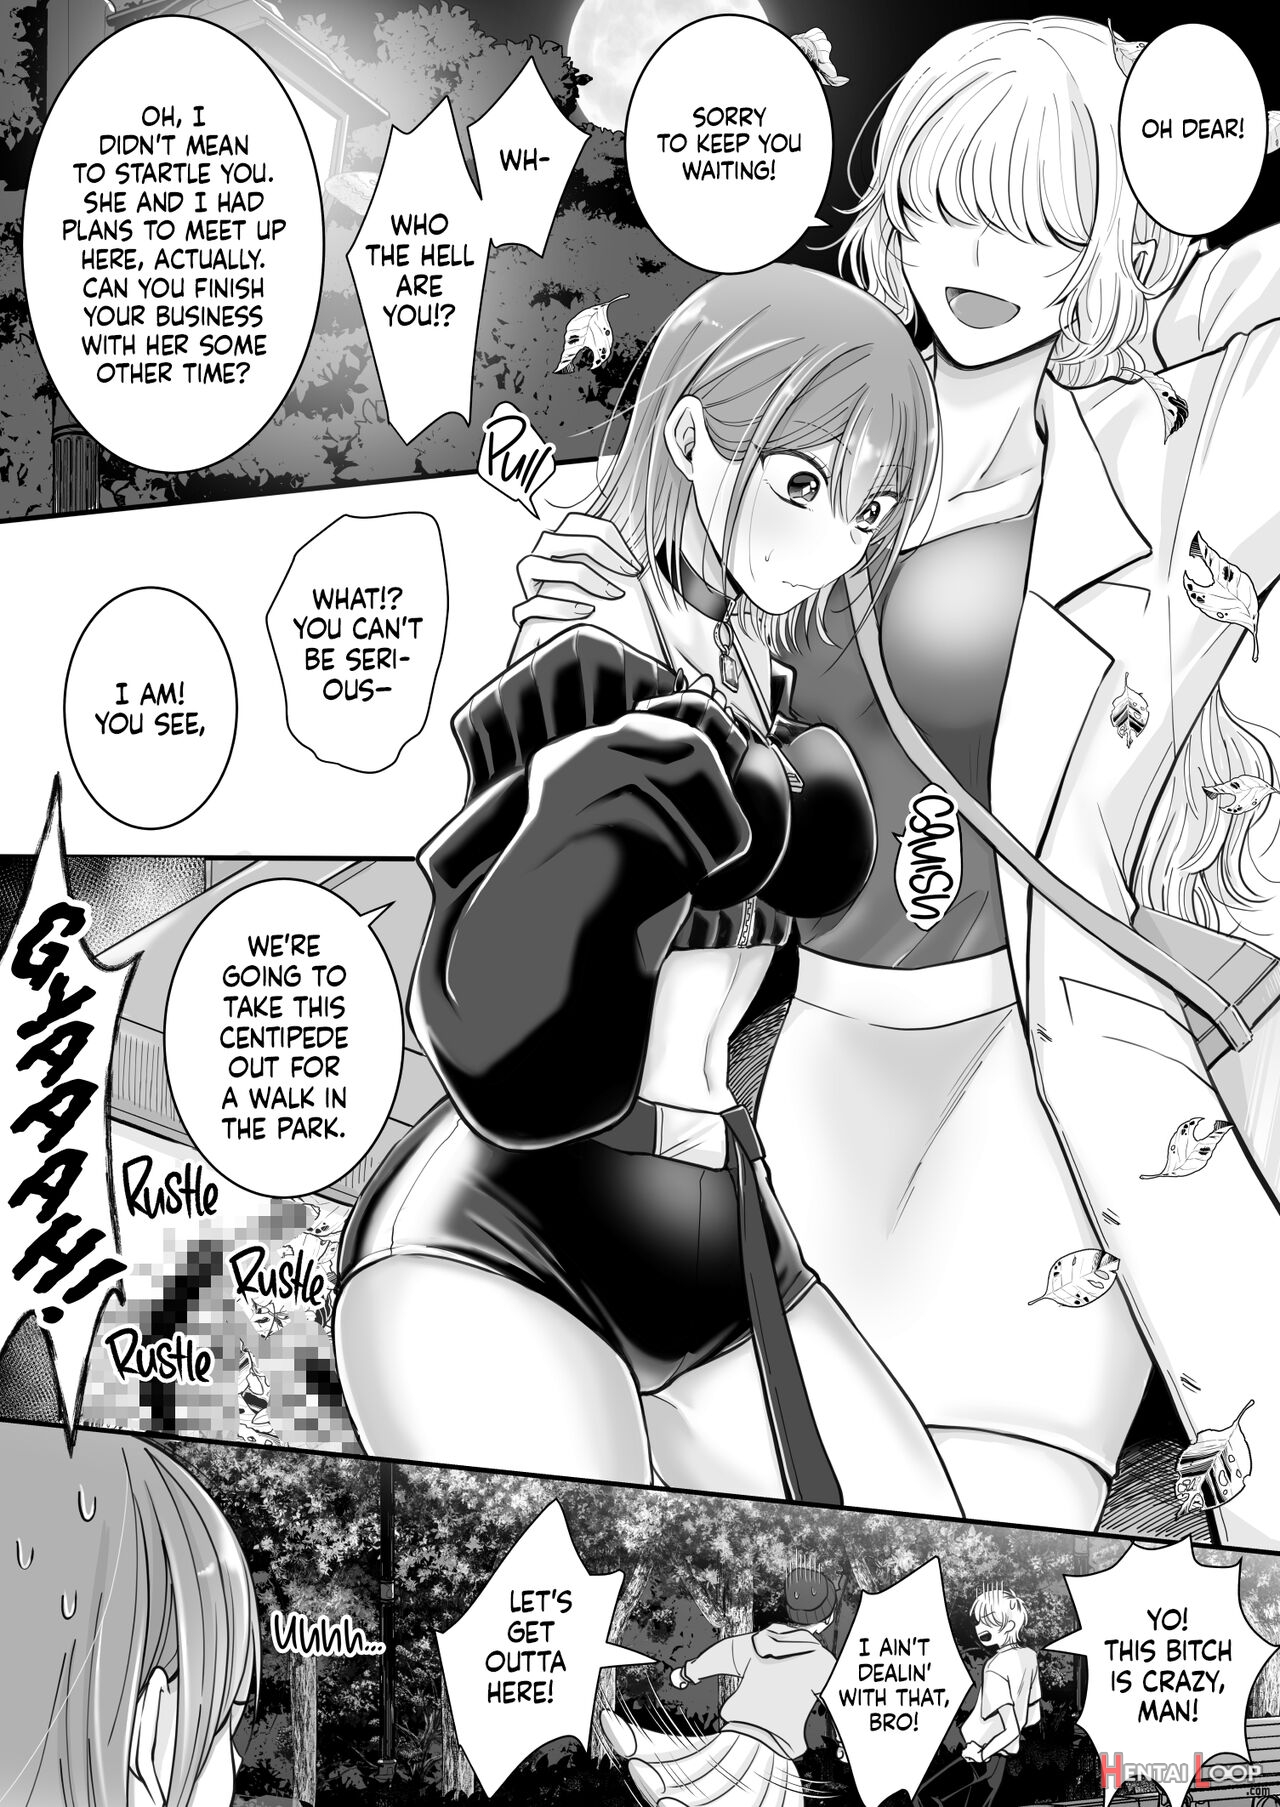 Yuri De Succubus Vol. 1 - I Can't Believe I Fell For A Human! page 4